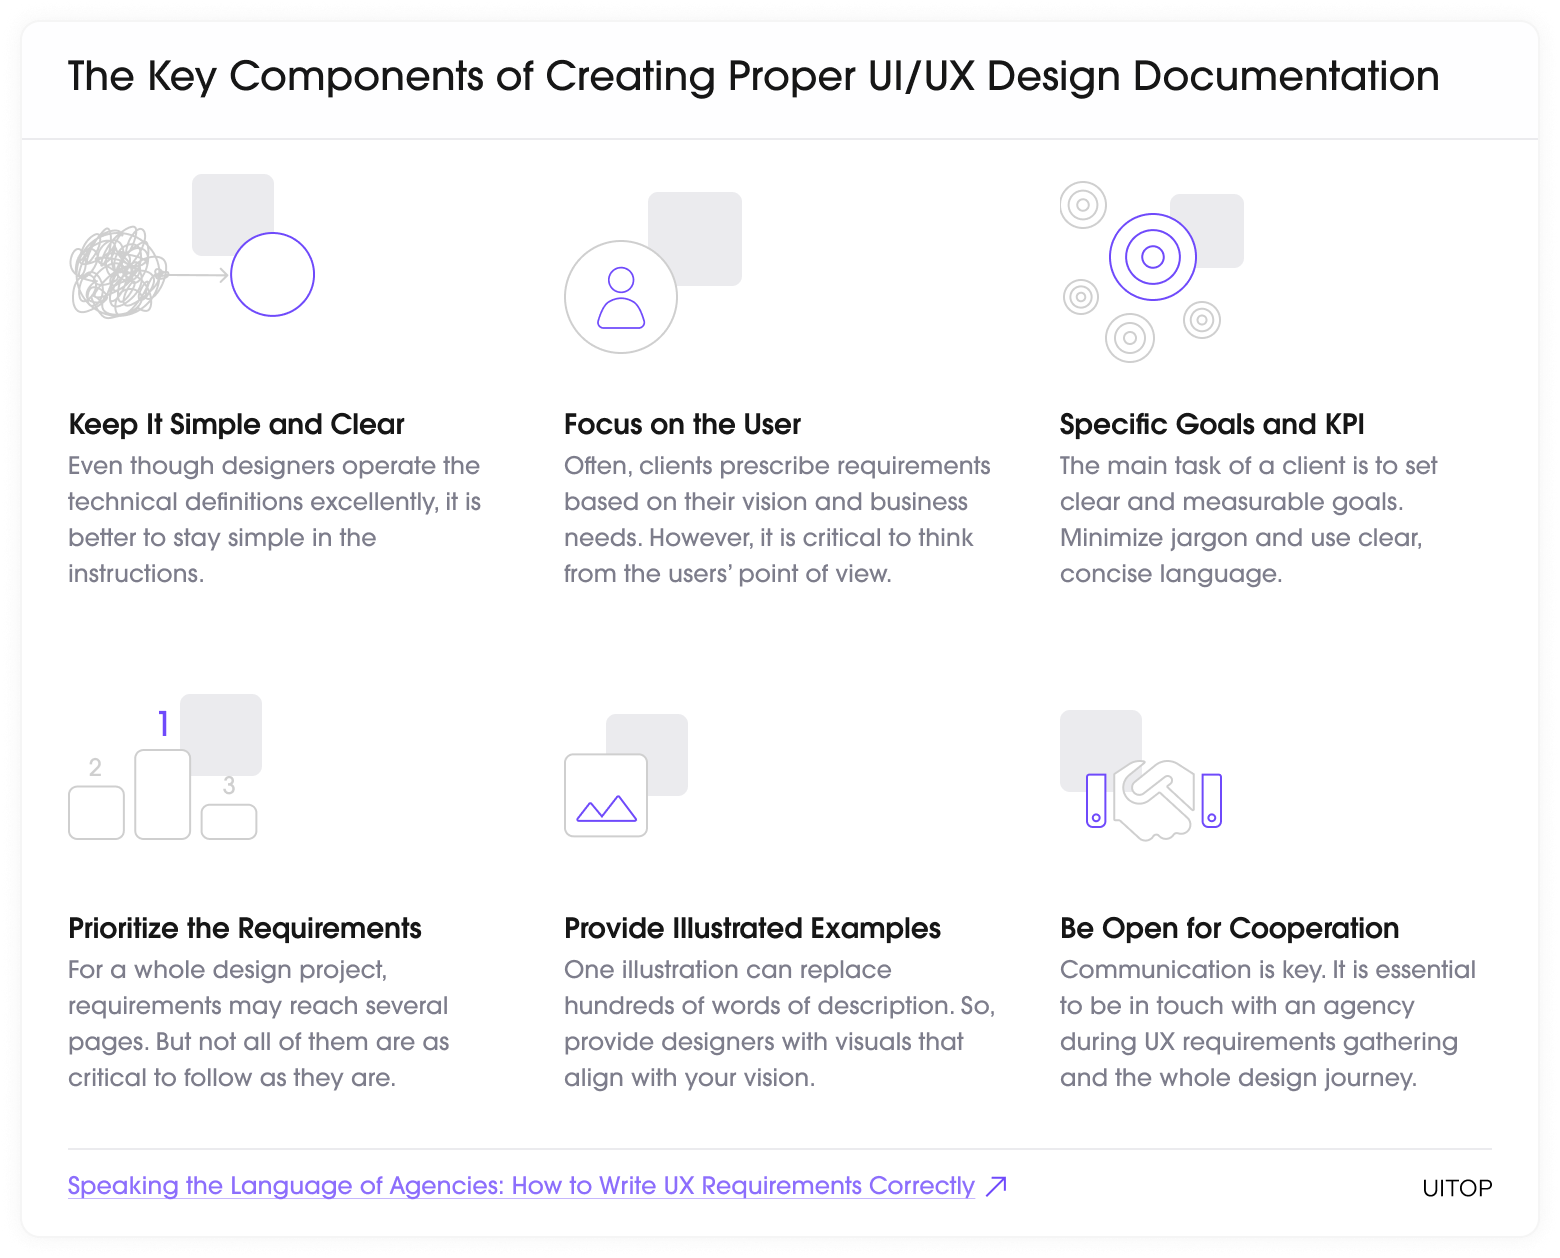 UI/UX requirements for a digital agency